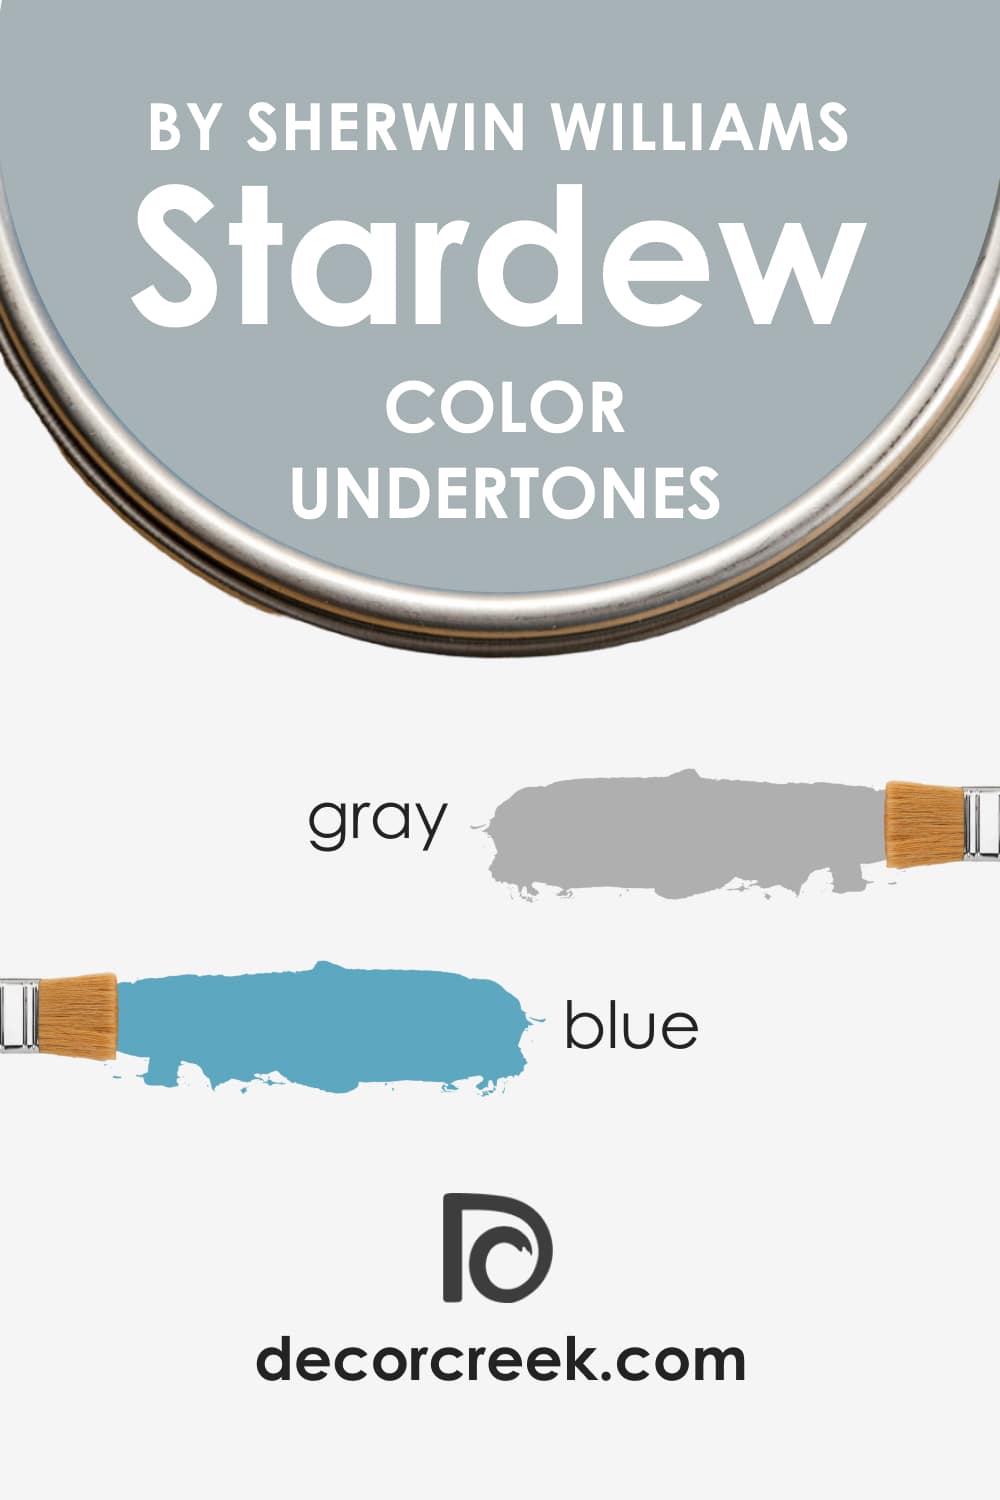 What Undertones Does Stardew SW-9138 Pint Color Have?